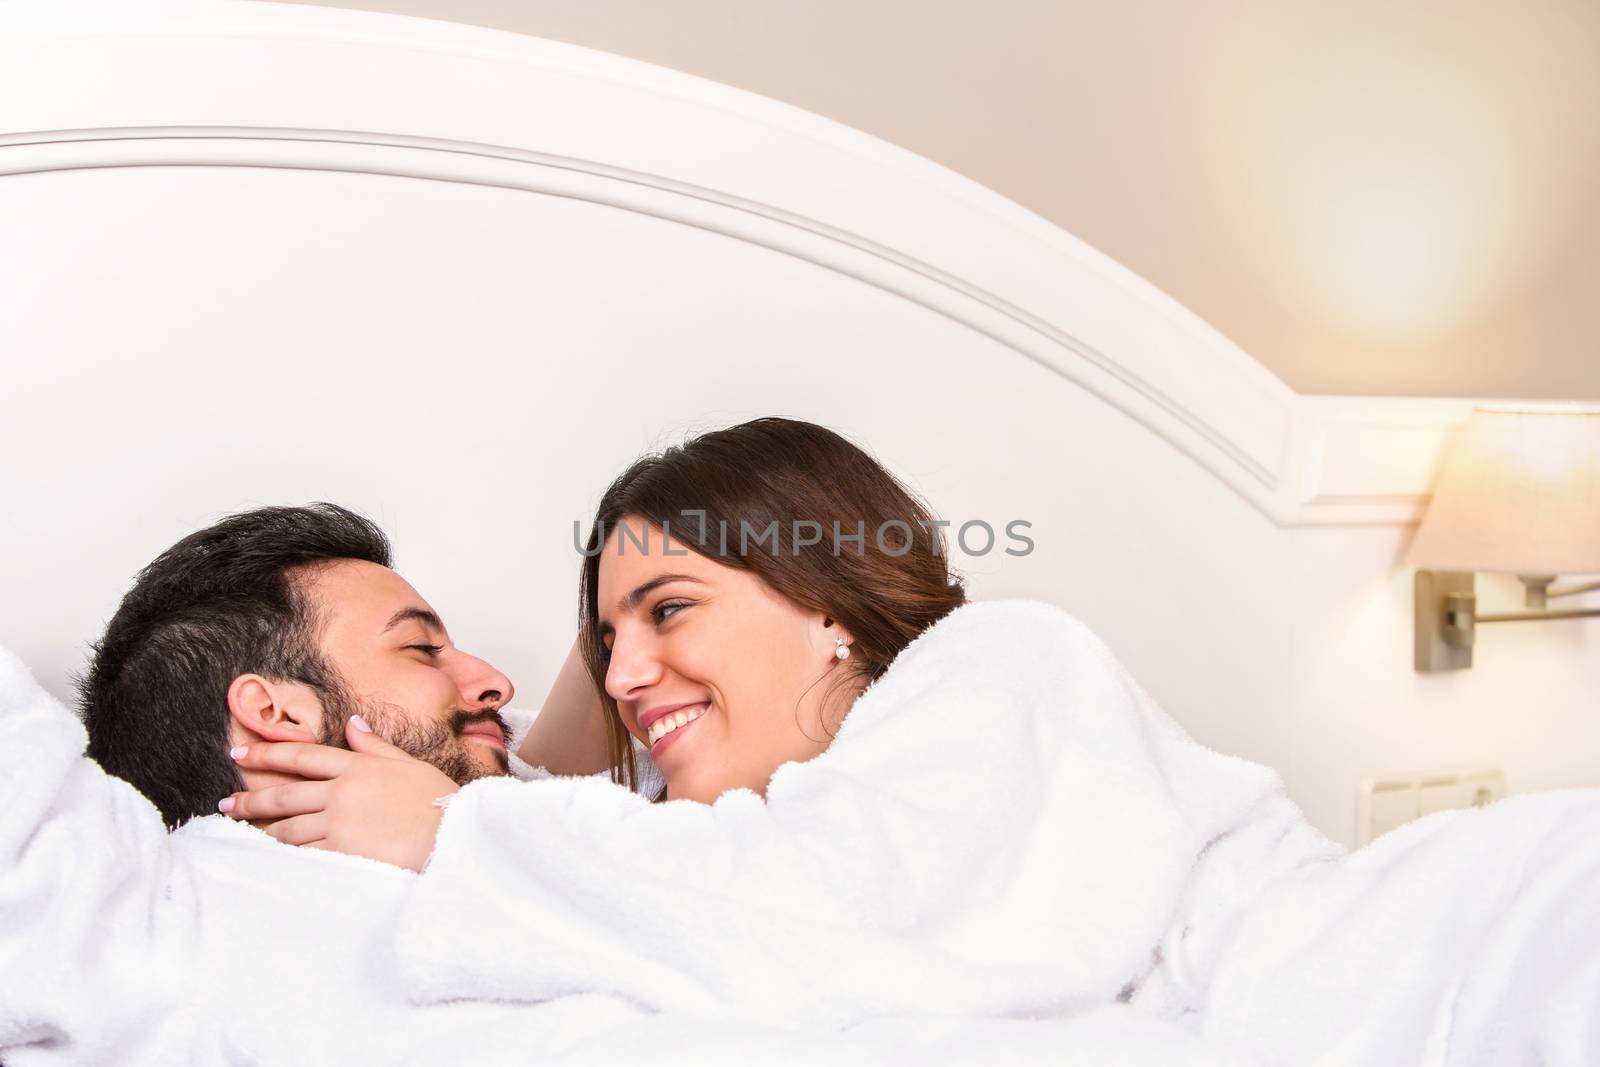 Close up portrait of cute young couple in bathrobe. Laying together on bed in hotel room. Girl showing affection.